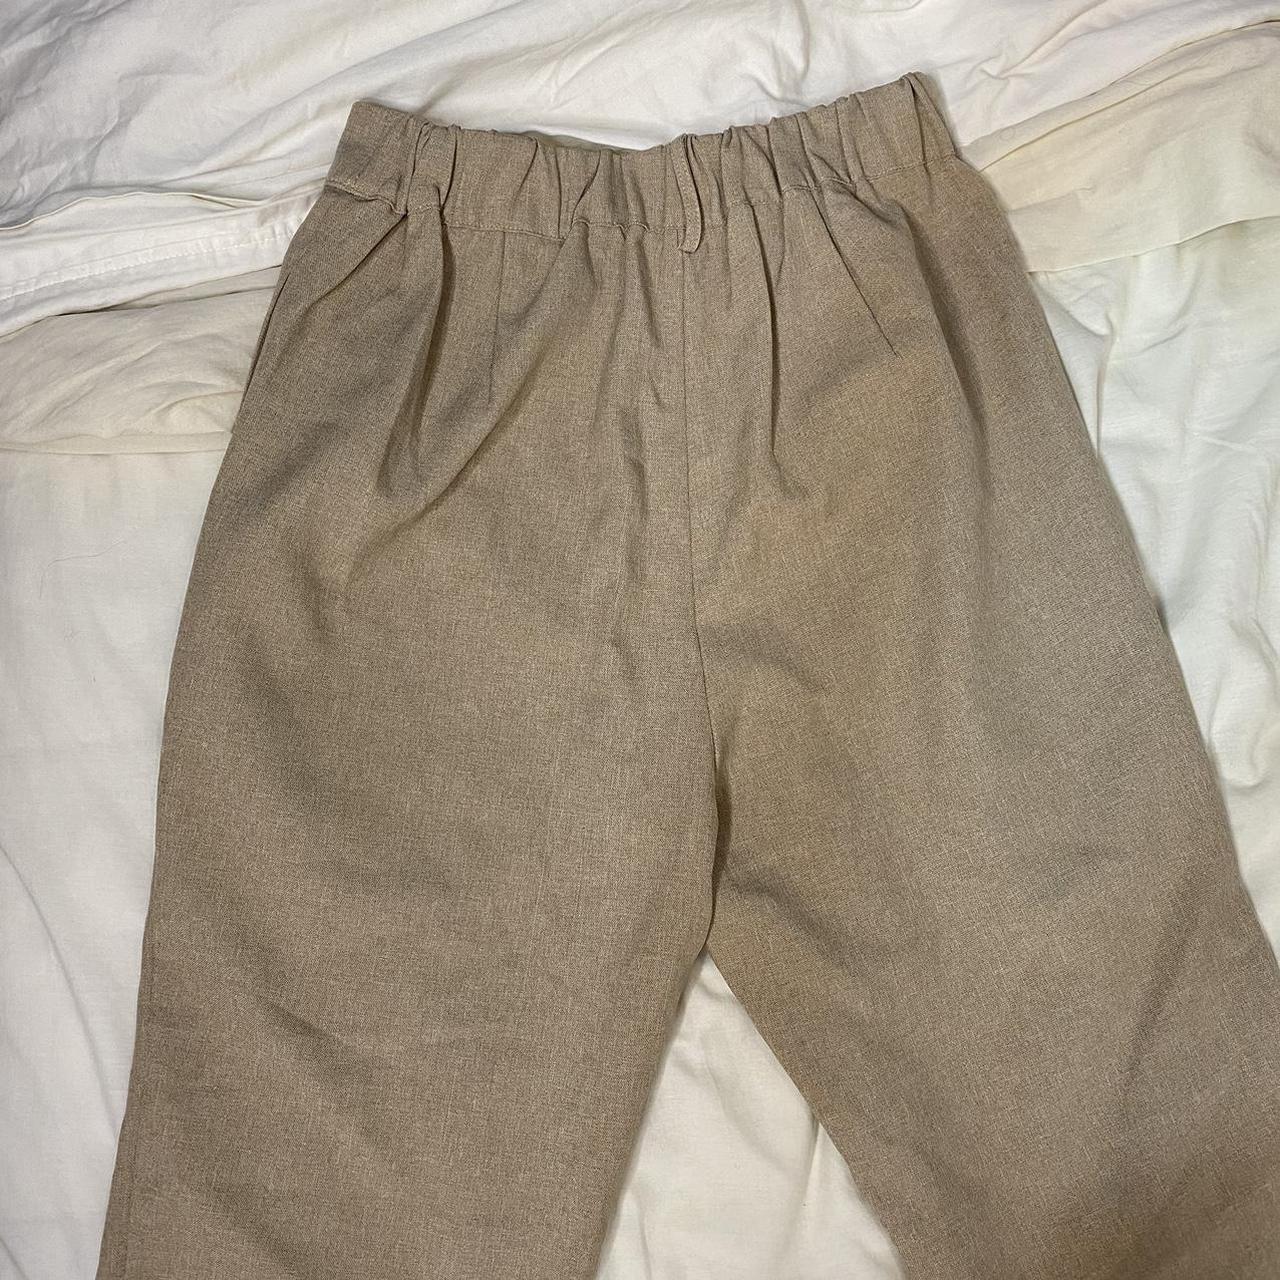 Mulberry Women's Tan and Khaki Trousers (3)